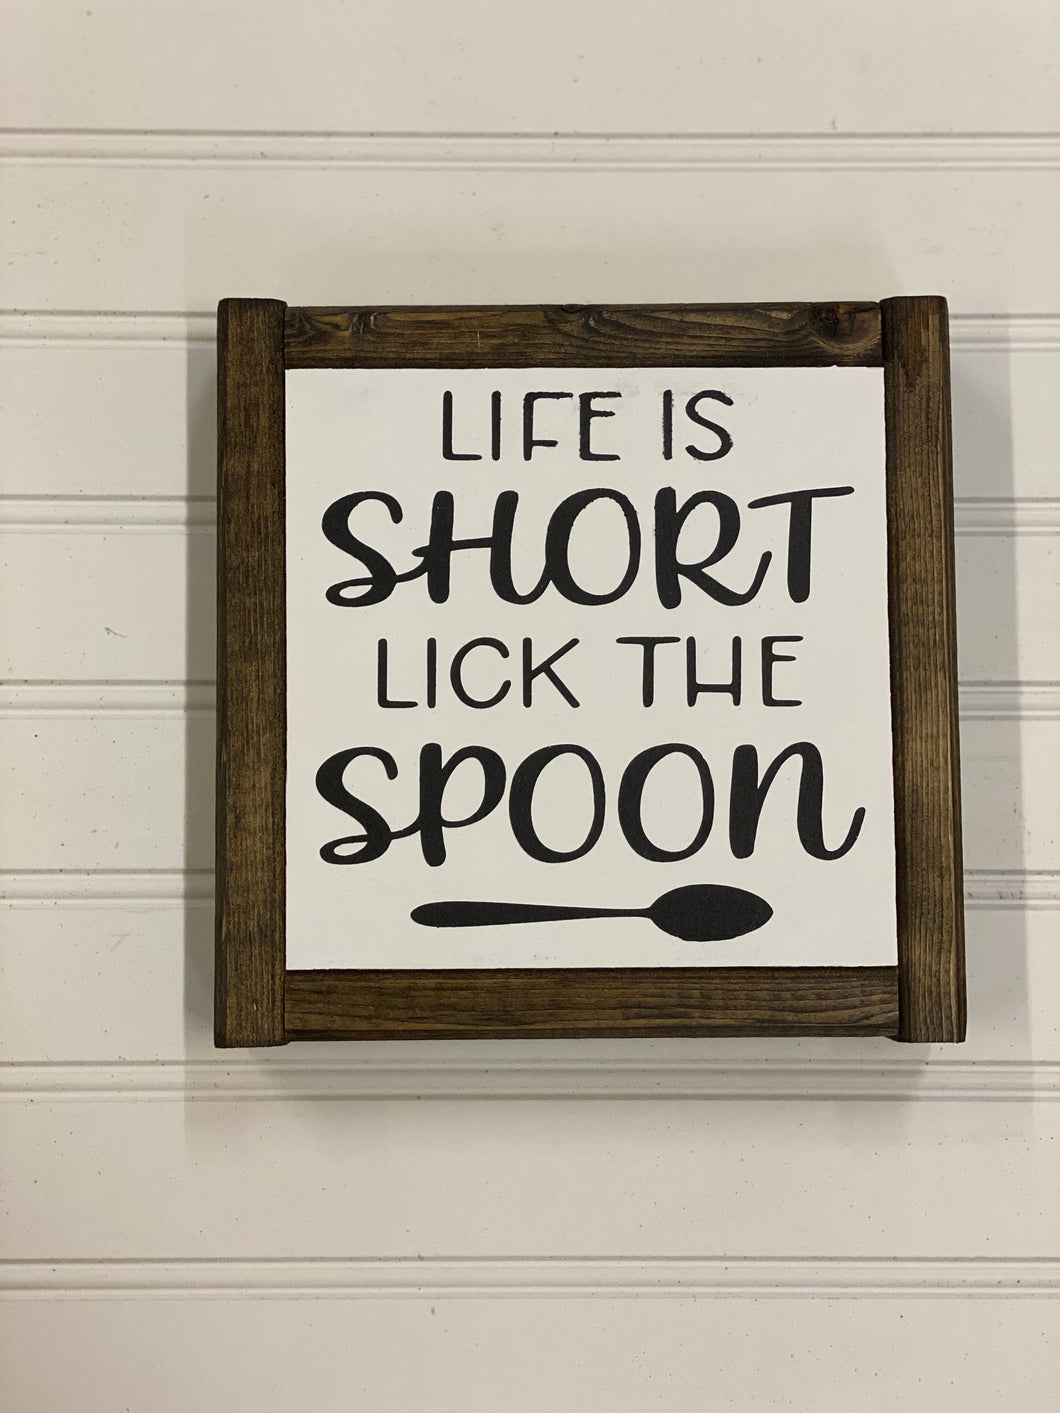 Life is short Lick the spoon